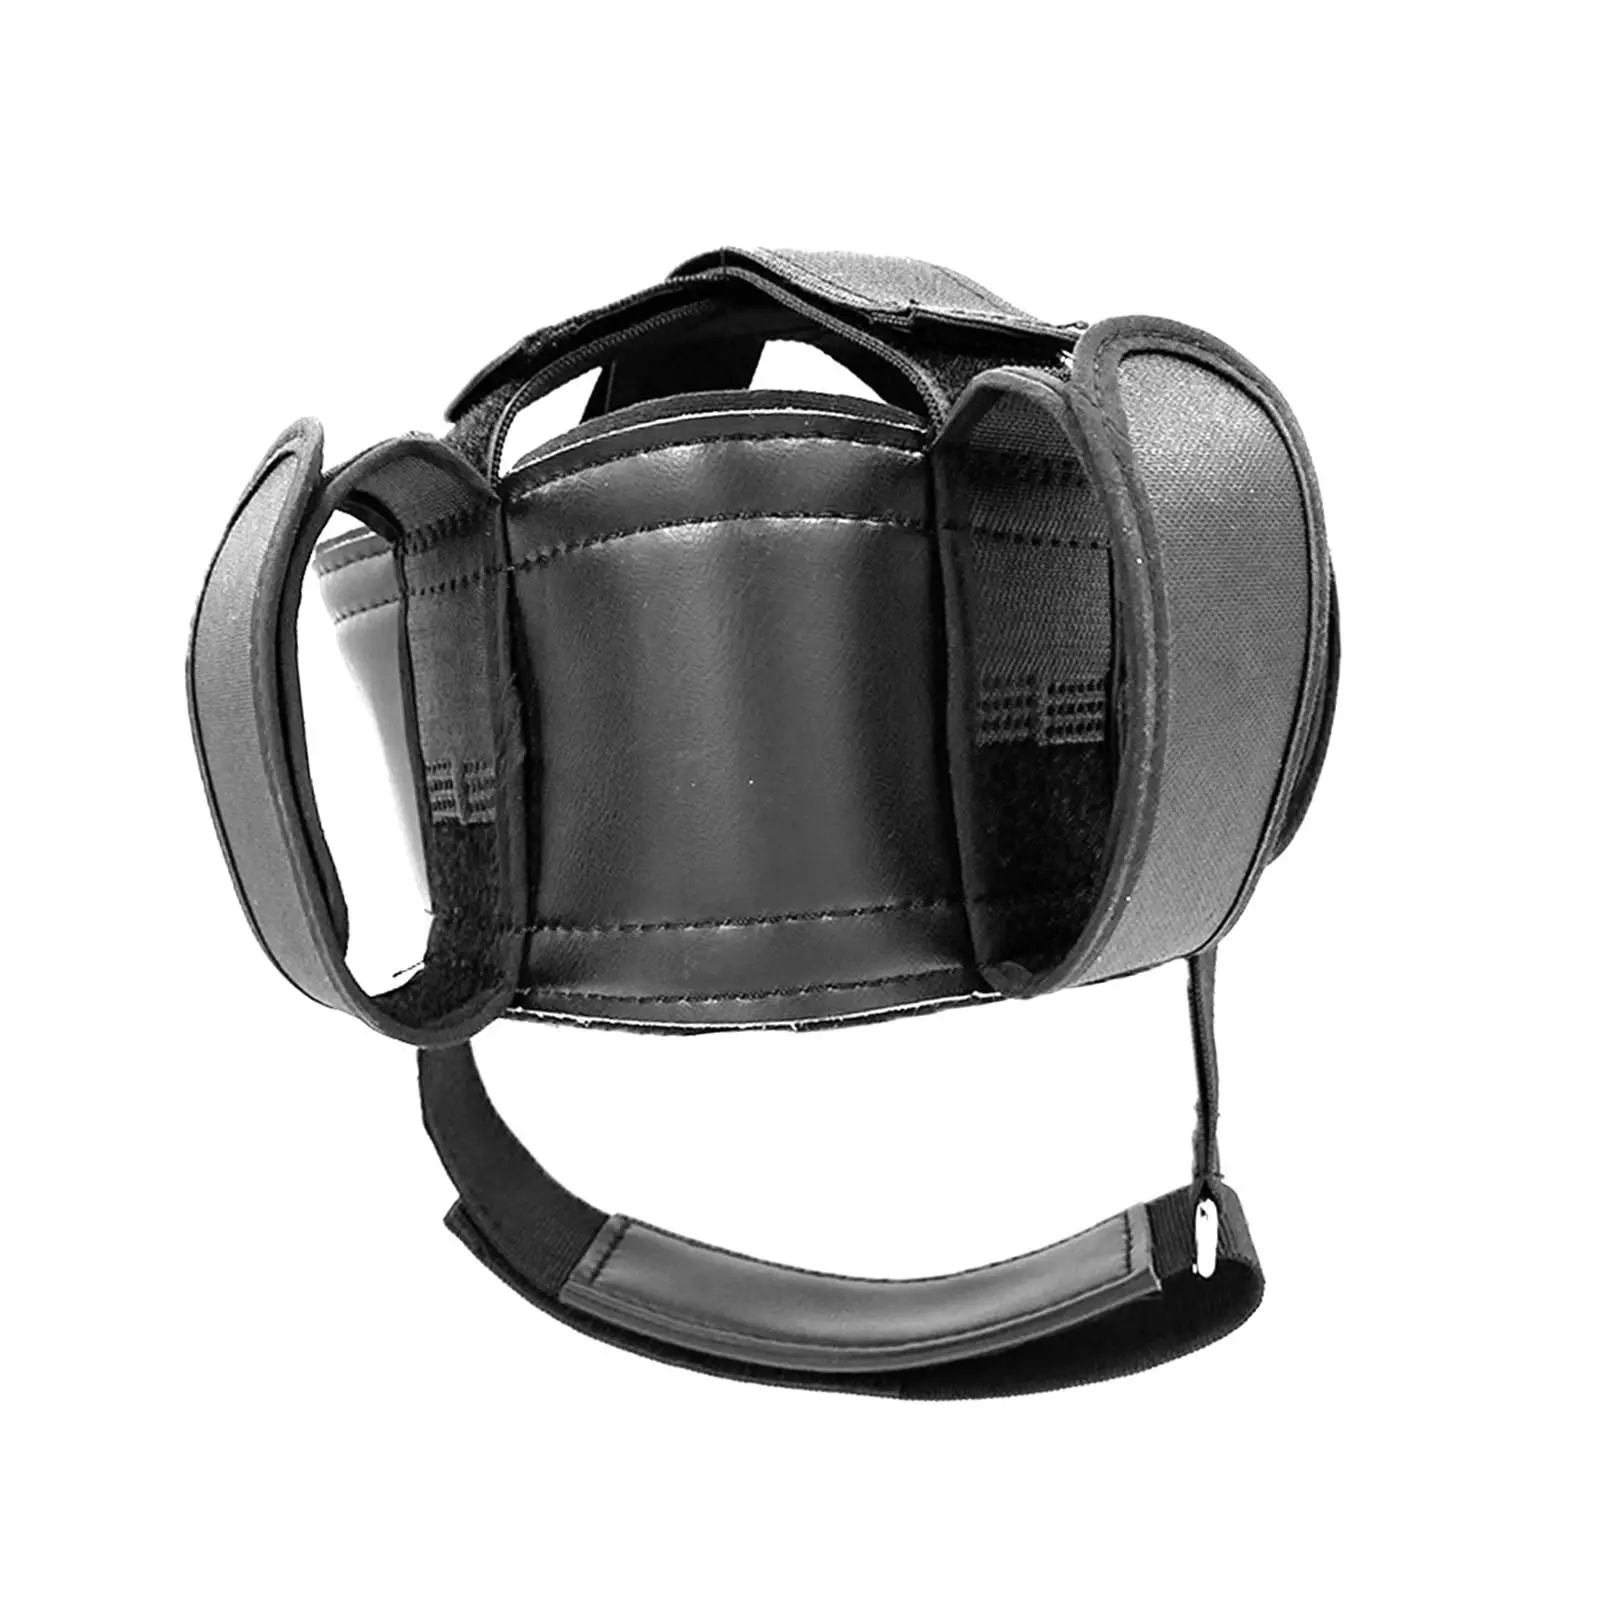 Head Neck Caps Cervical Vertebra Power Strength Harness Strengh Exercise Helmets for Weight Lifting Gyms Sports Boxing Muscle